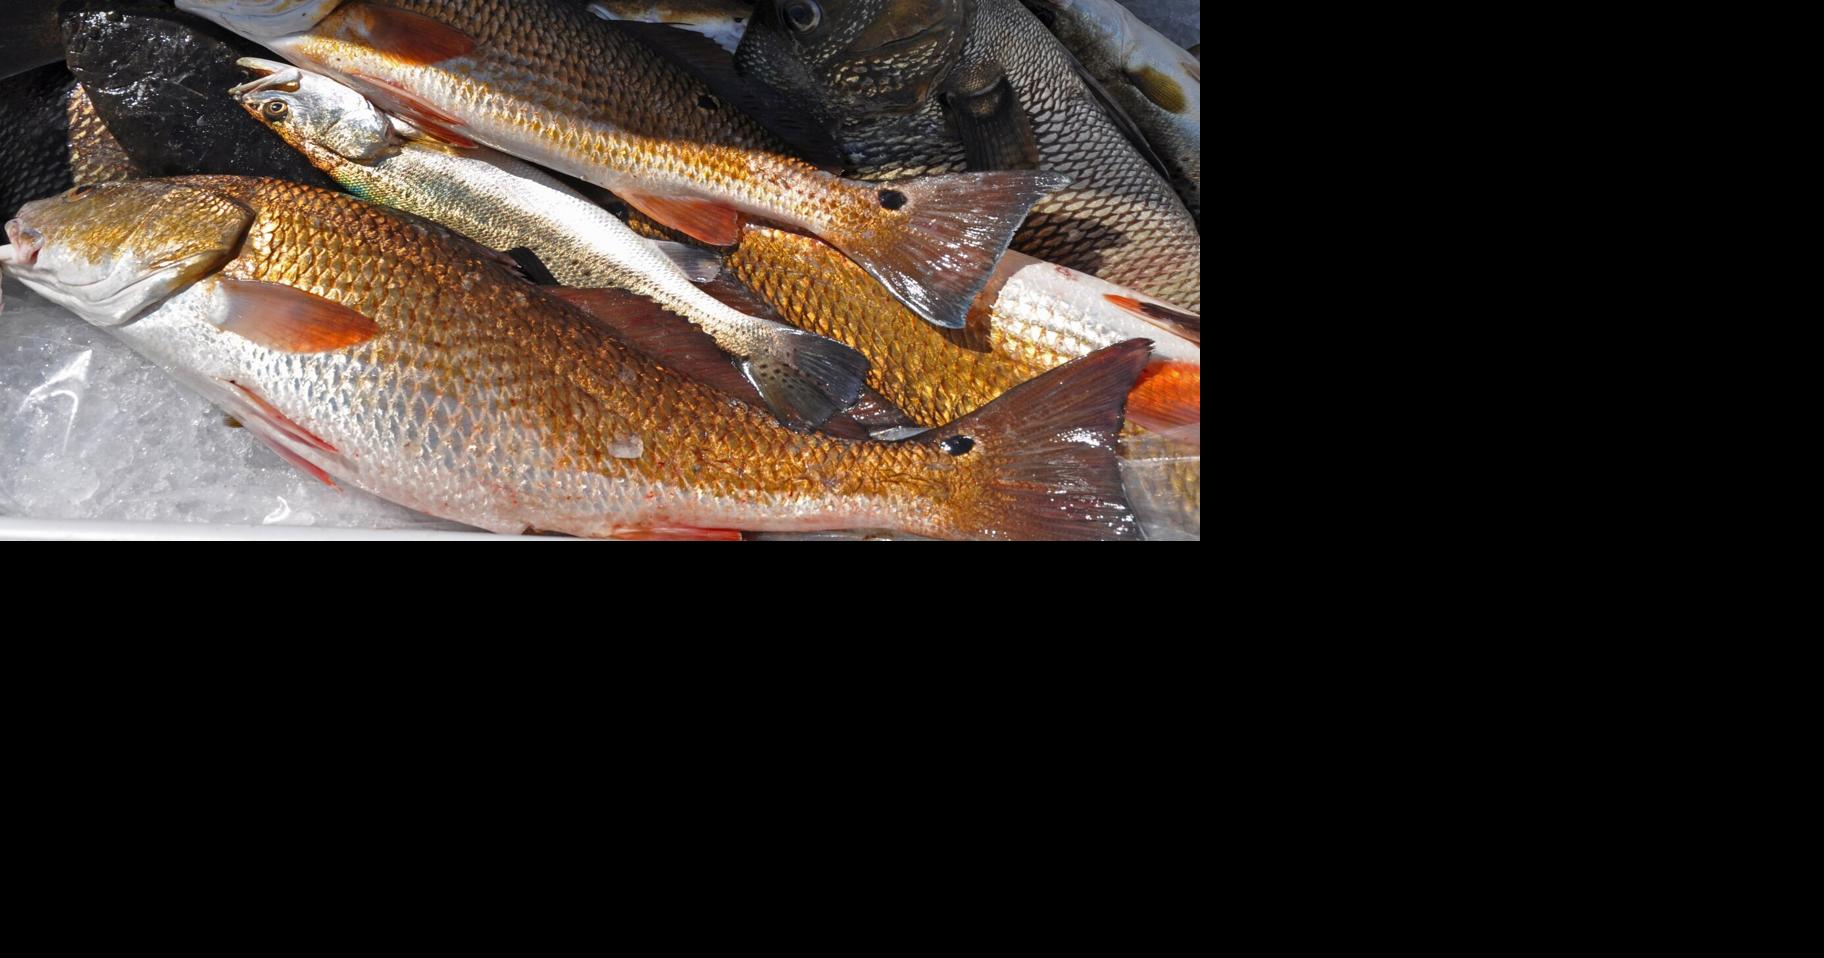 What's fresh in August? Redfish, LOCAL Life